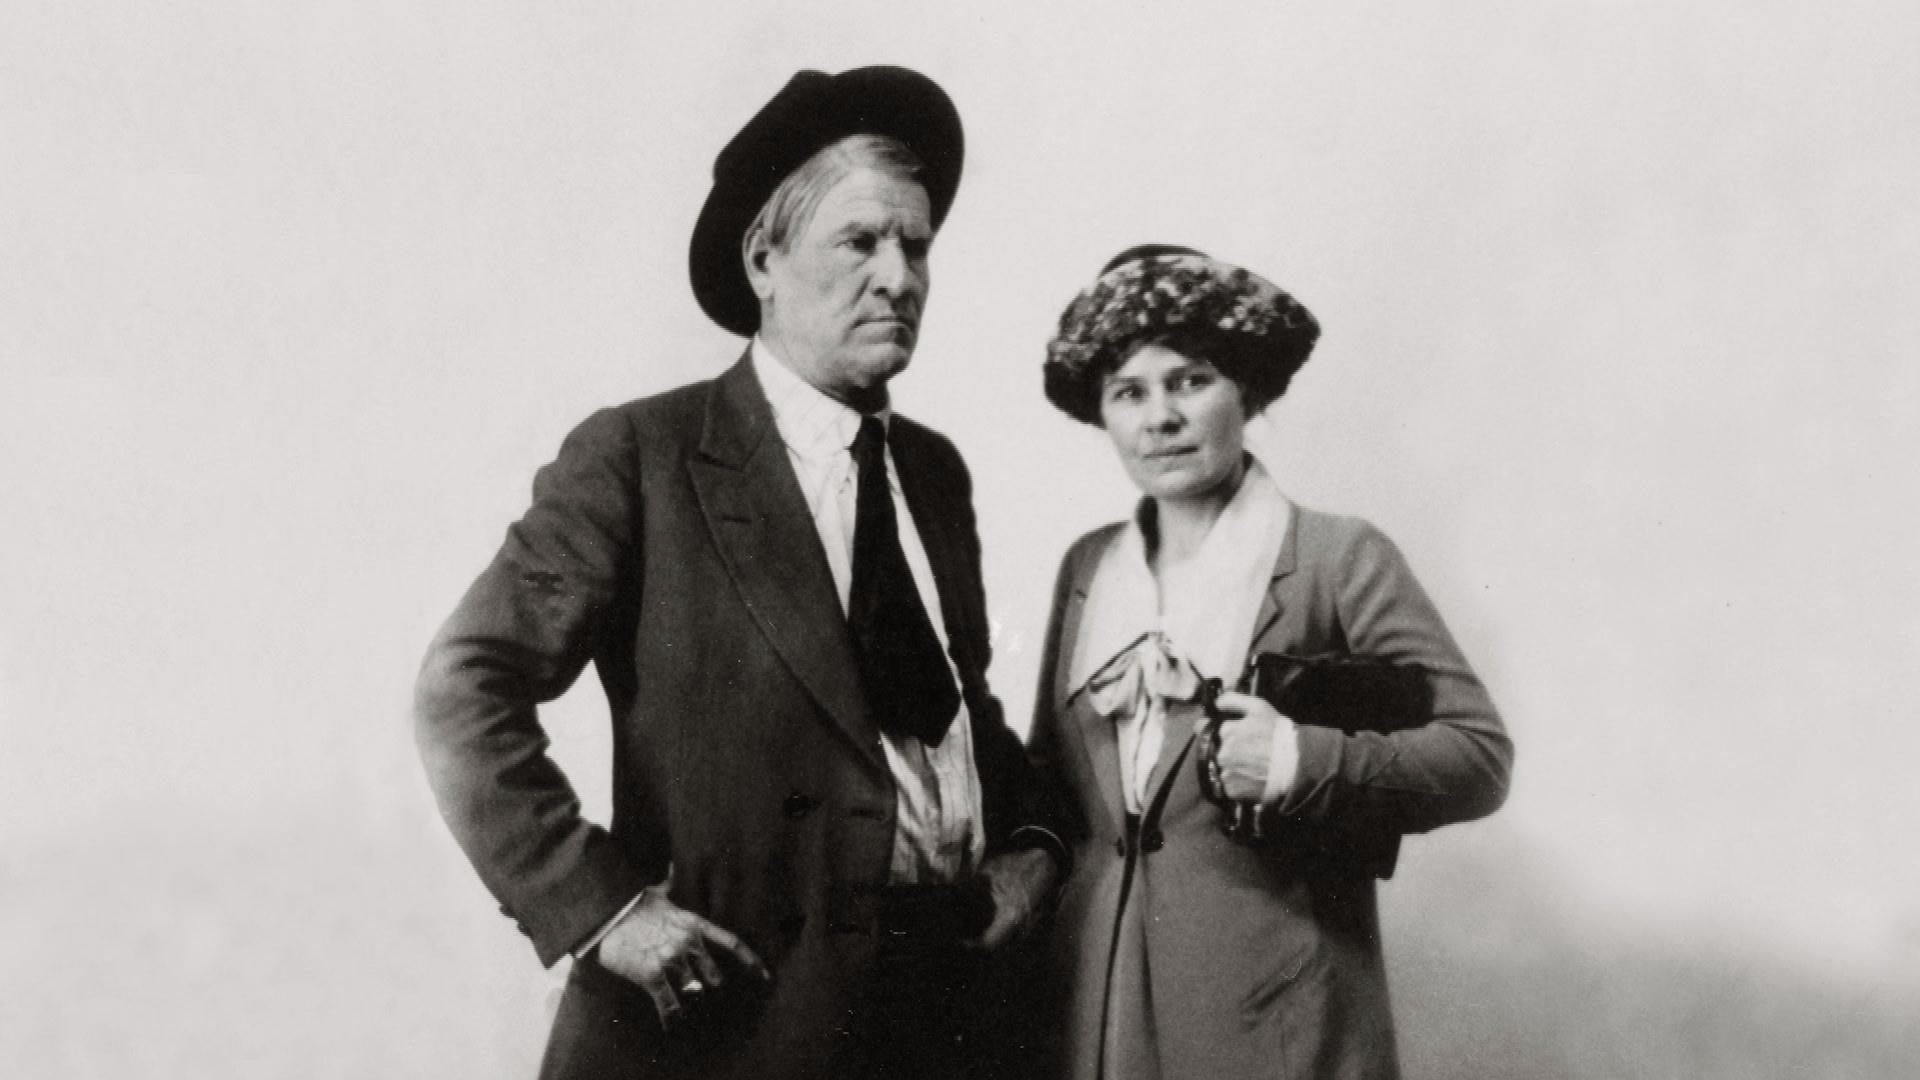 Black and White portrait of Charlie and Nancy Russell in Great Falls, Montana.